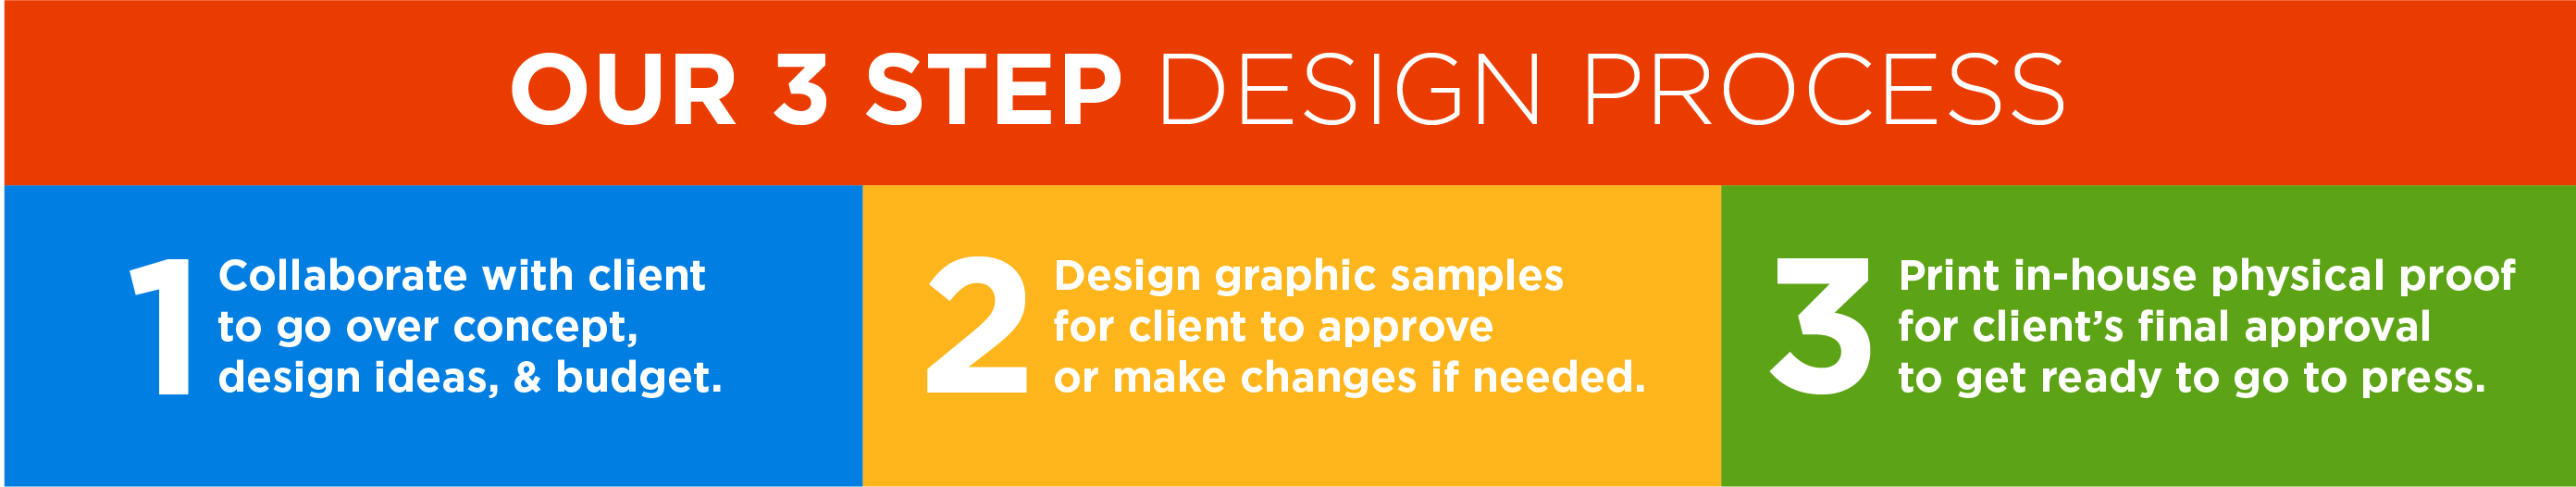 1. collaborate with client to go over concept, design ideas, and budget 2. design graphic samples for client to approve or make changes if needed 3. print in-house physical proof for client's final approval to get ready to go to press